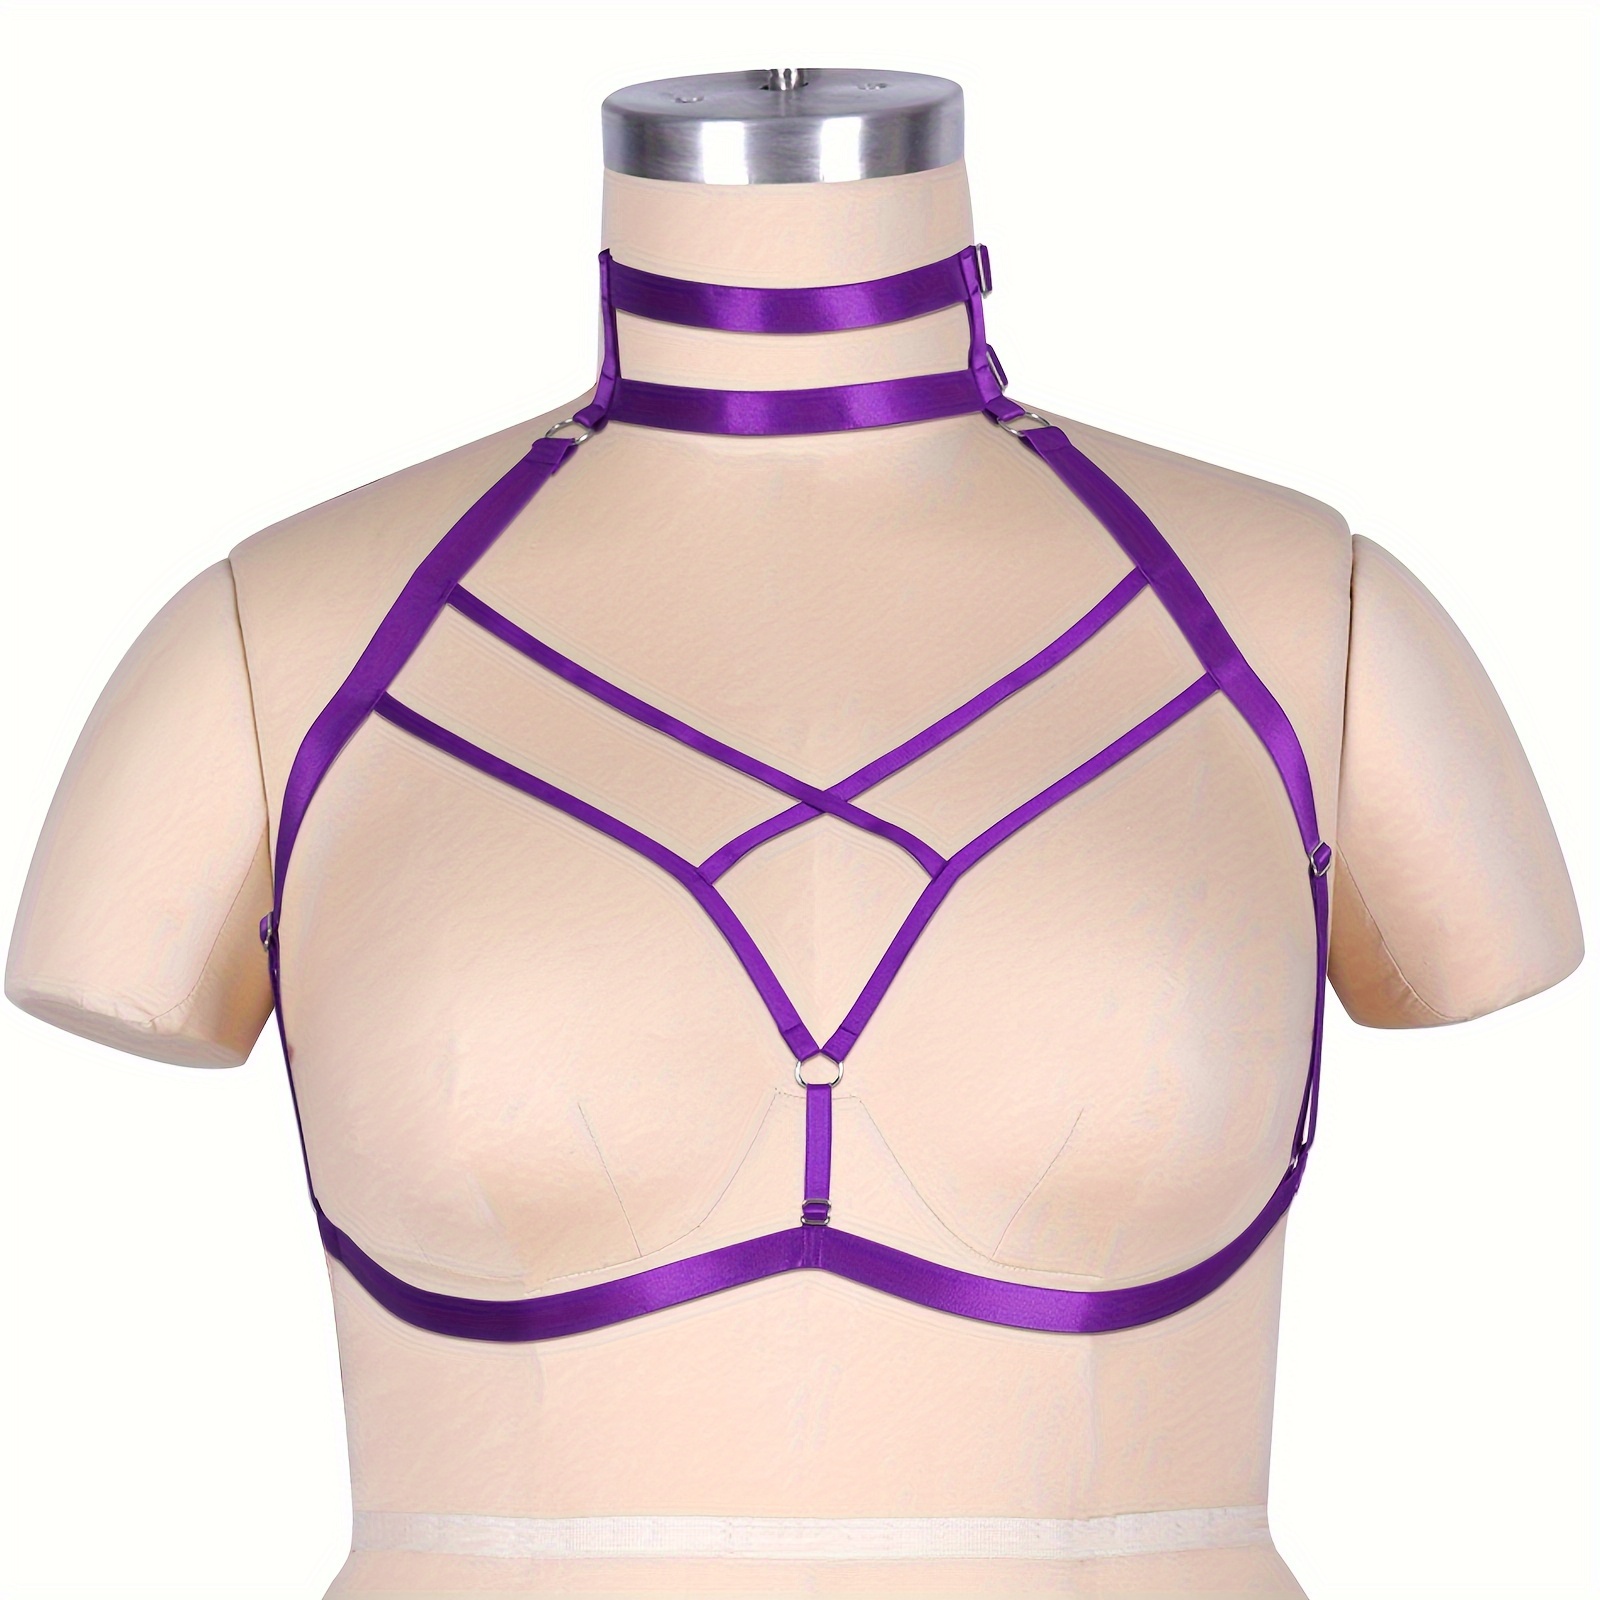 Women Bandage Harness Bra Elastic Cage Bra Hollow Open Cup Push Up Bra Sexy  Goth Bustier Lingerie Body Harness Cage - Garters - AliExpress